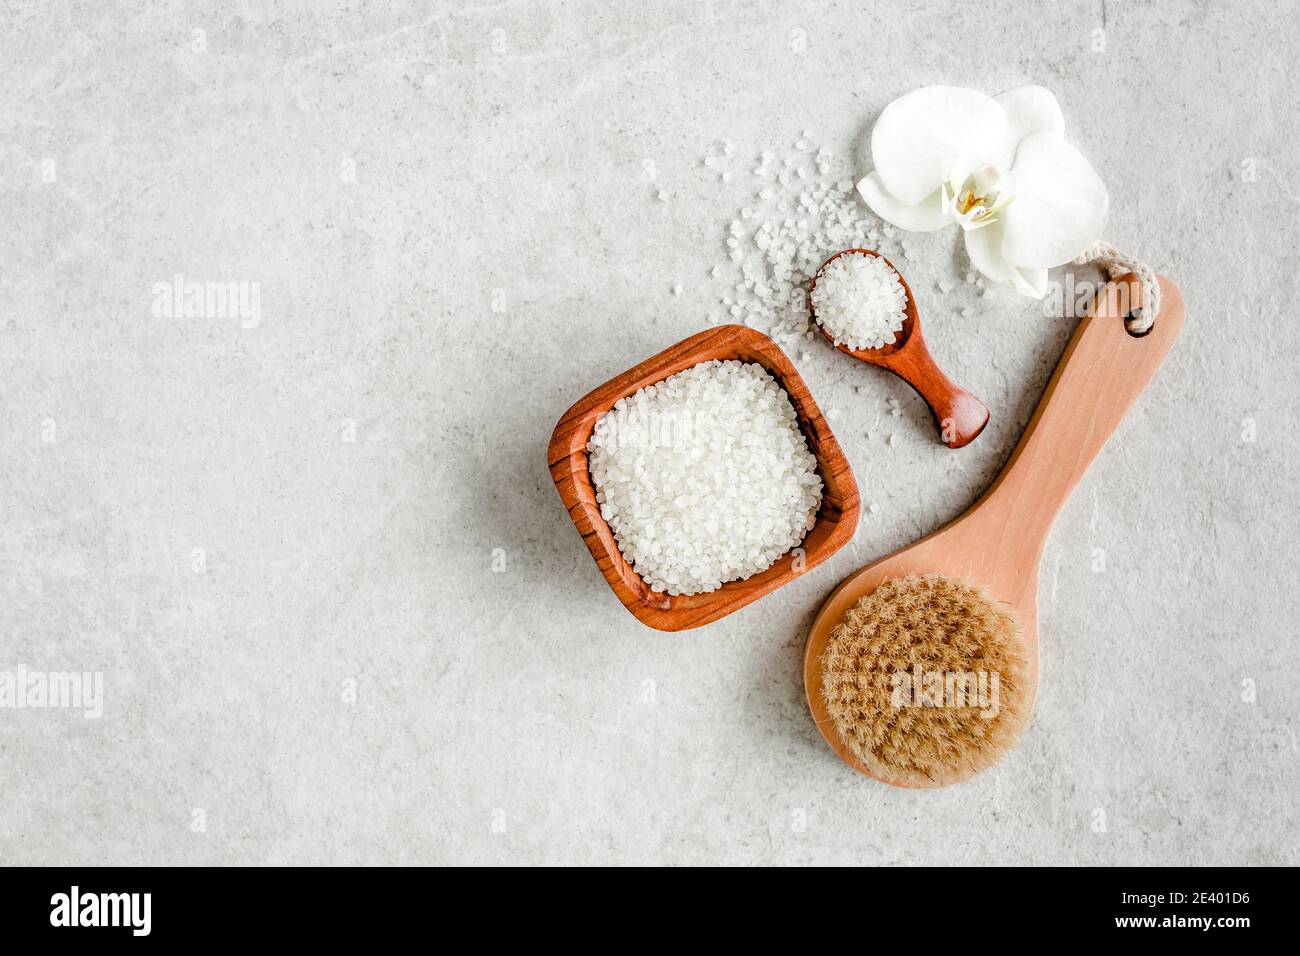 Spa skincare concept. Natural Organic spa cosmetics products, sea salt, massage brush and tropic palm leaves on gray marble table from above.  Stock Photo